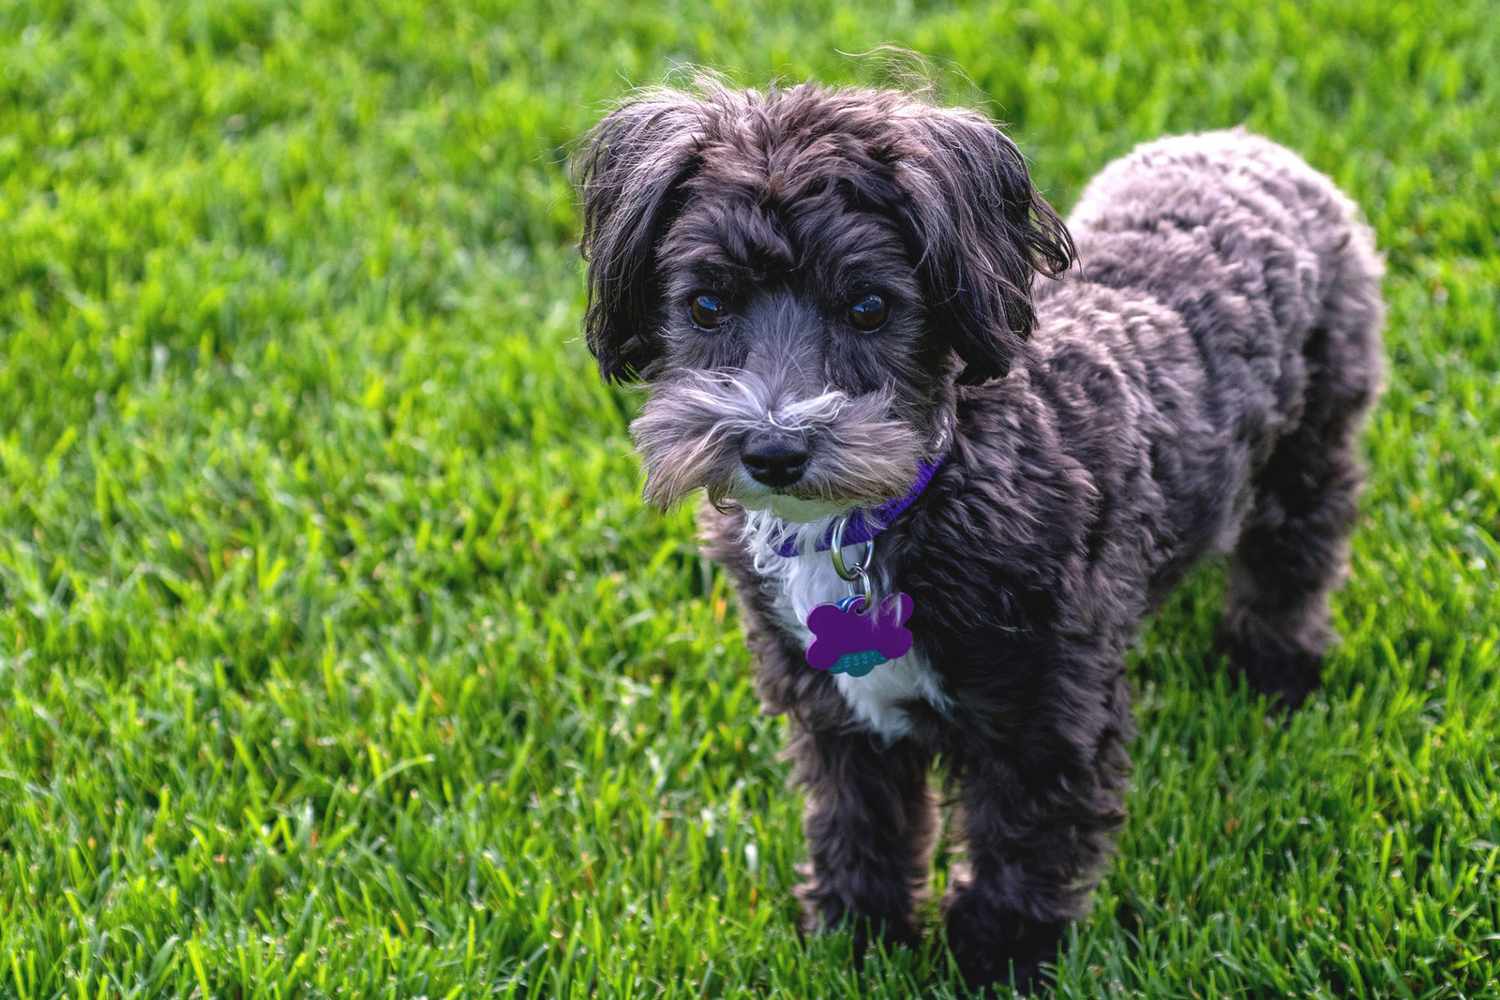 Dark colored maltipoo puppy stands on grass wearing purple dog tags